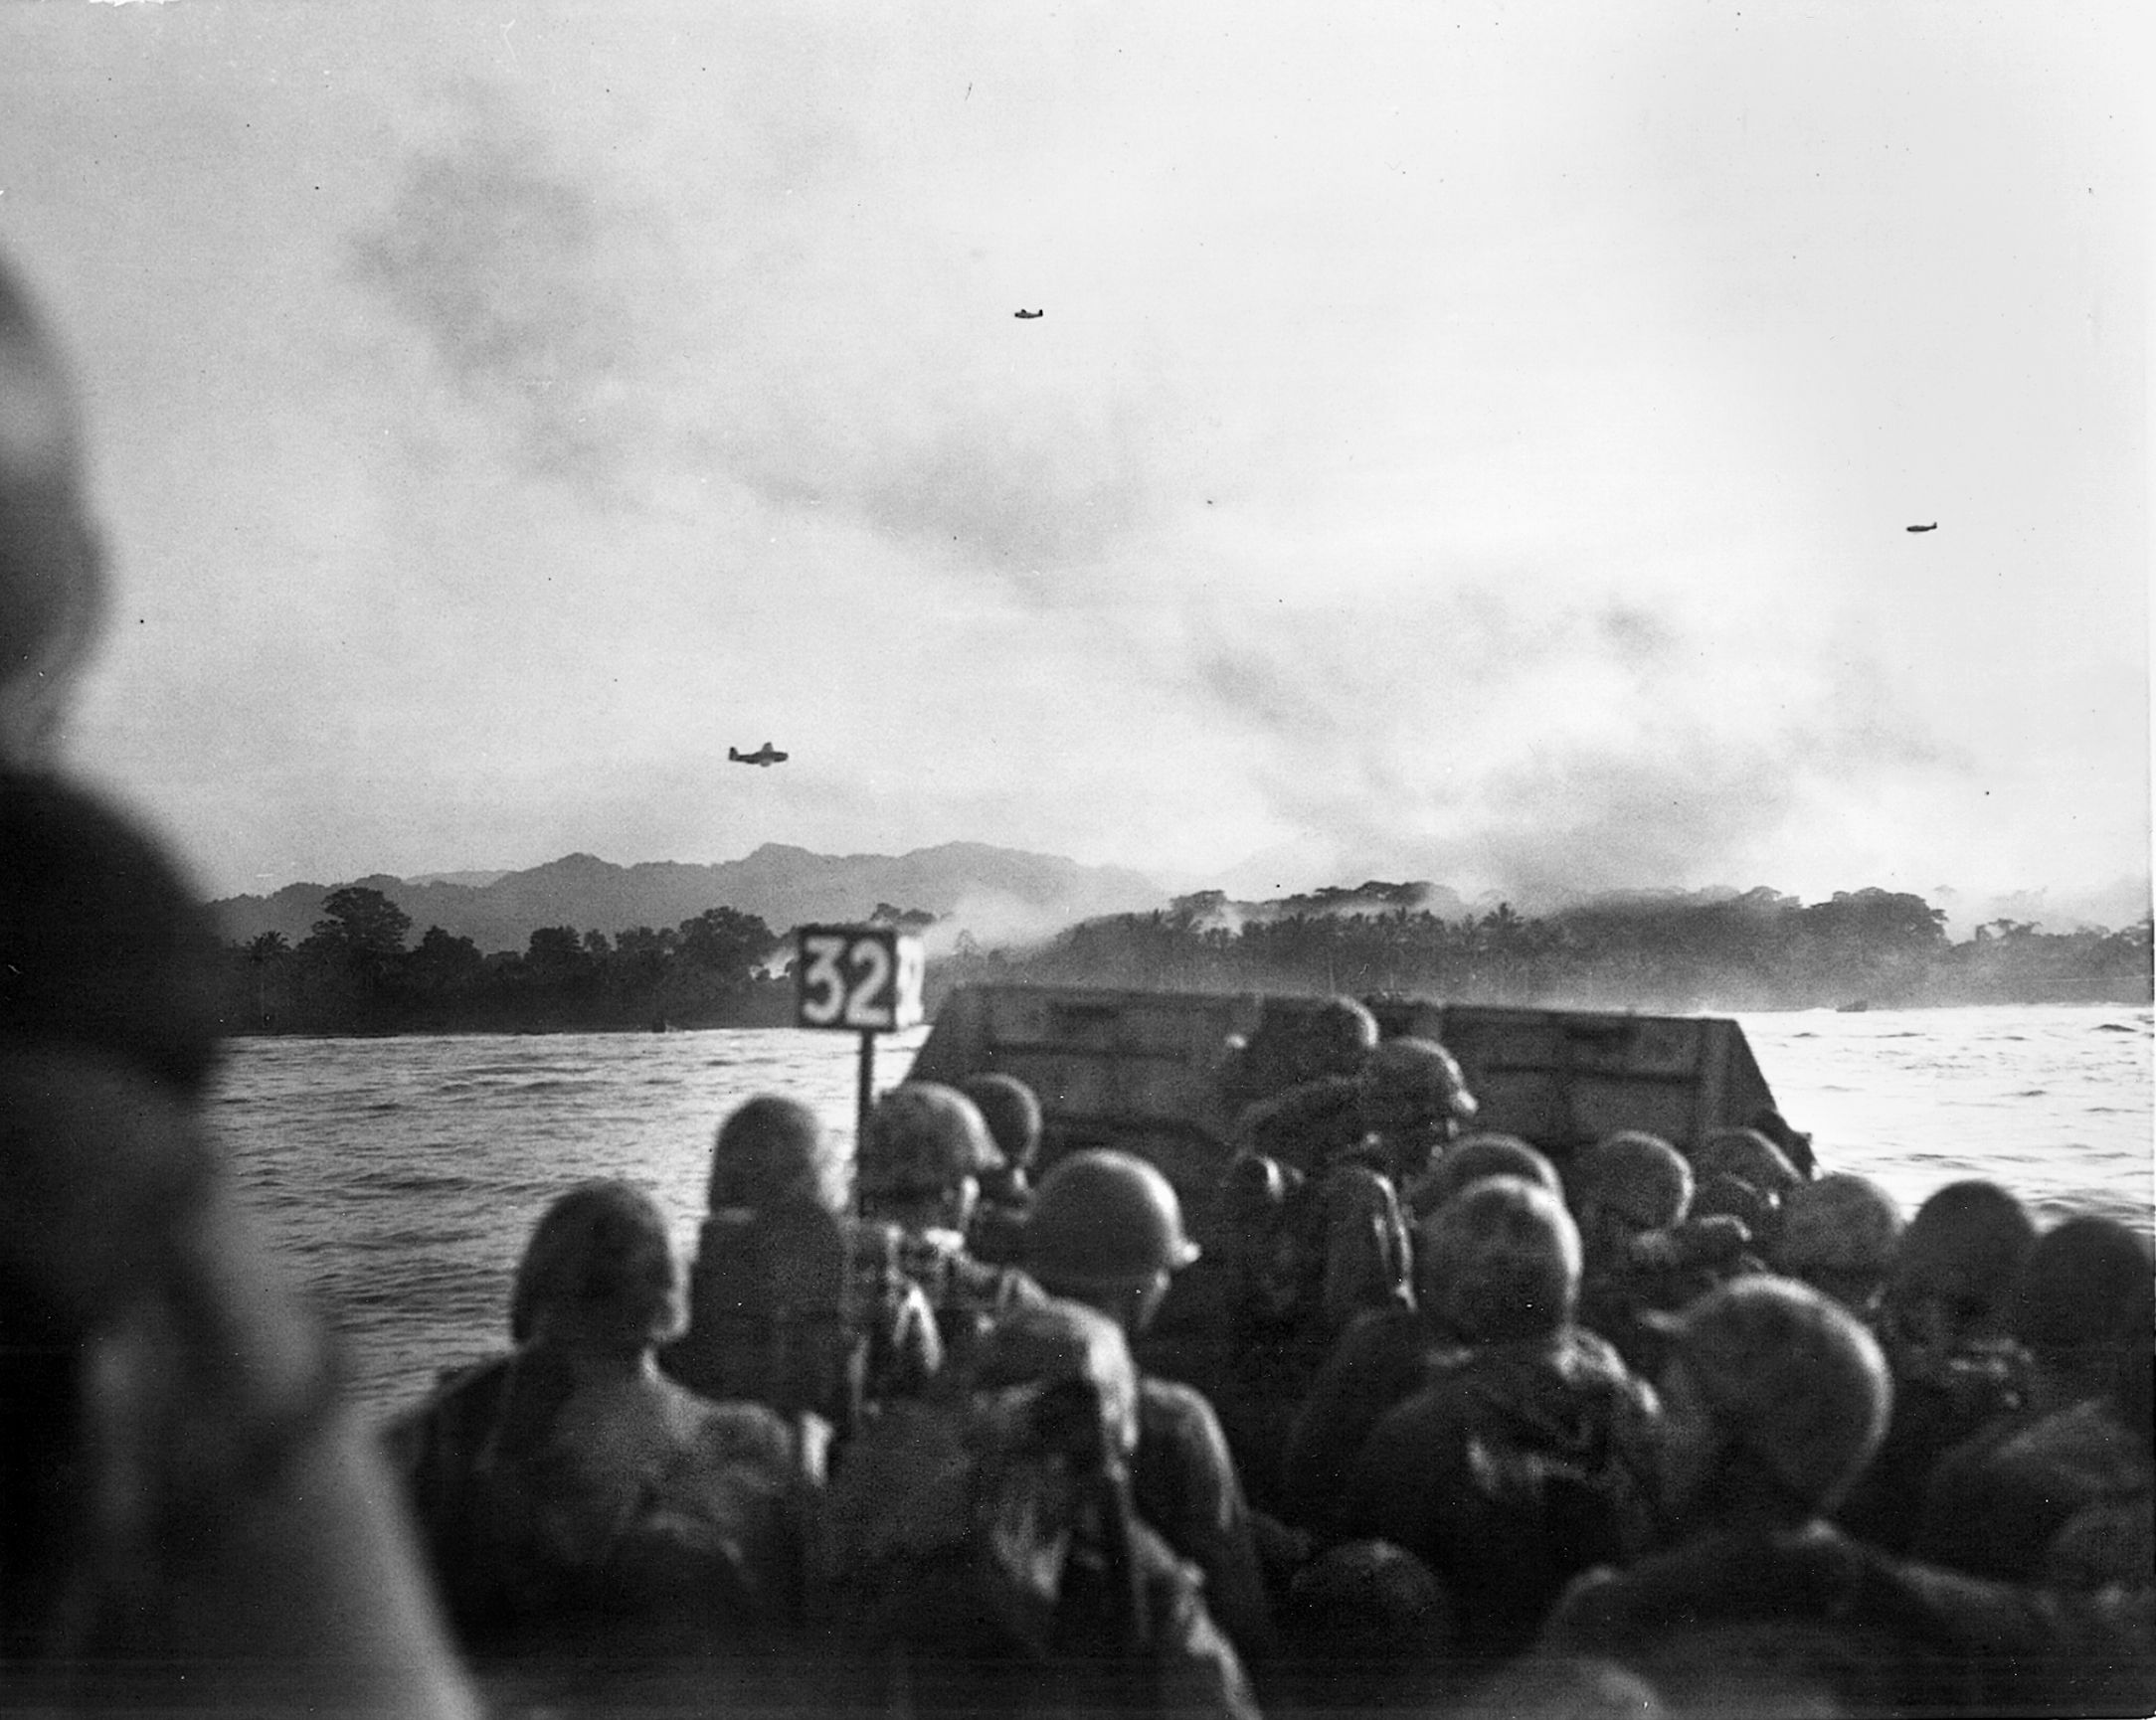 A landing craft carries U.S. troops toward the invasion beach at Cape Gloucester. The great Japanese base at Rabaul was also located on the island, however, U.S. forces did not attempt a direct assault on the fortress.